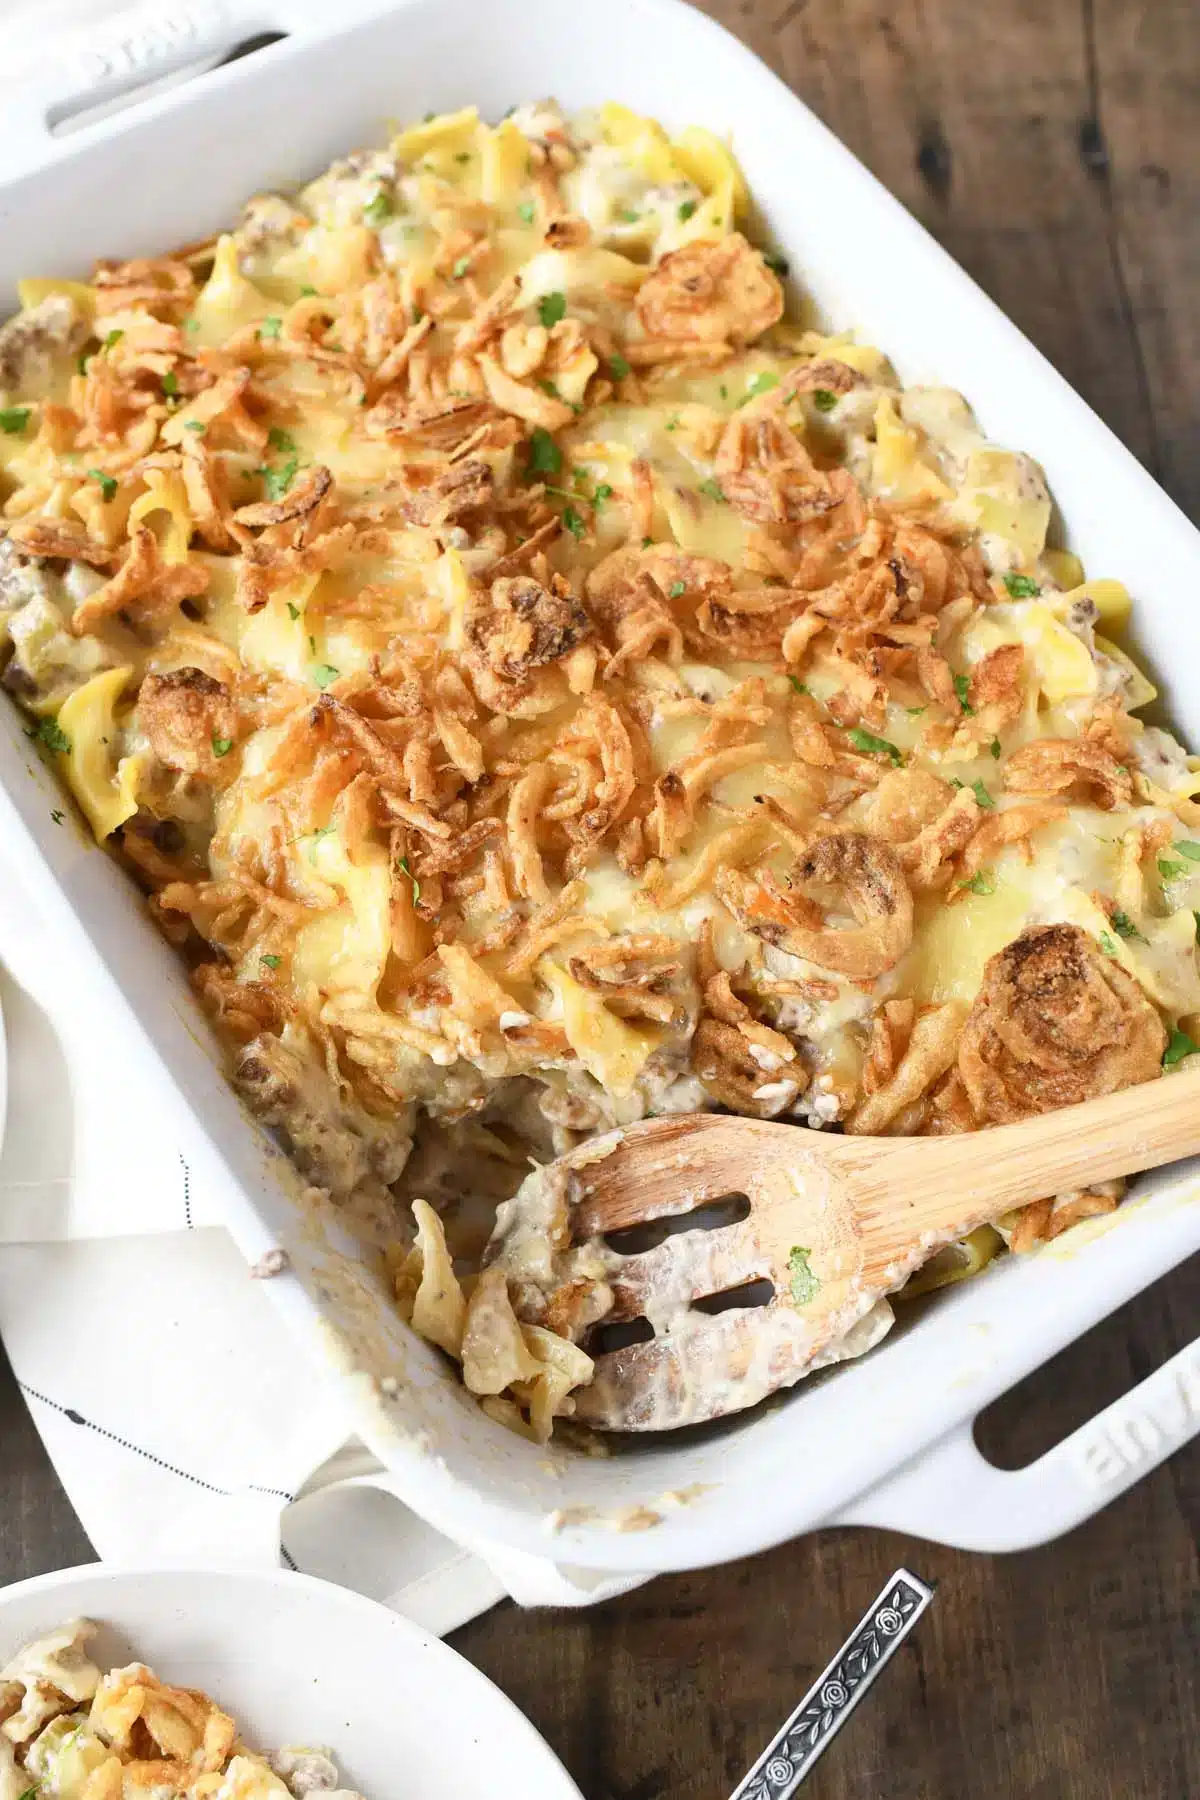 French onion ground beef casserole in a white baking dish.